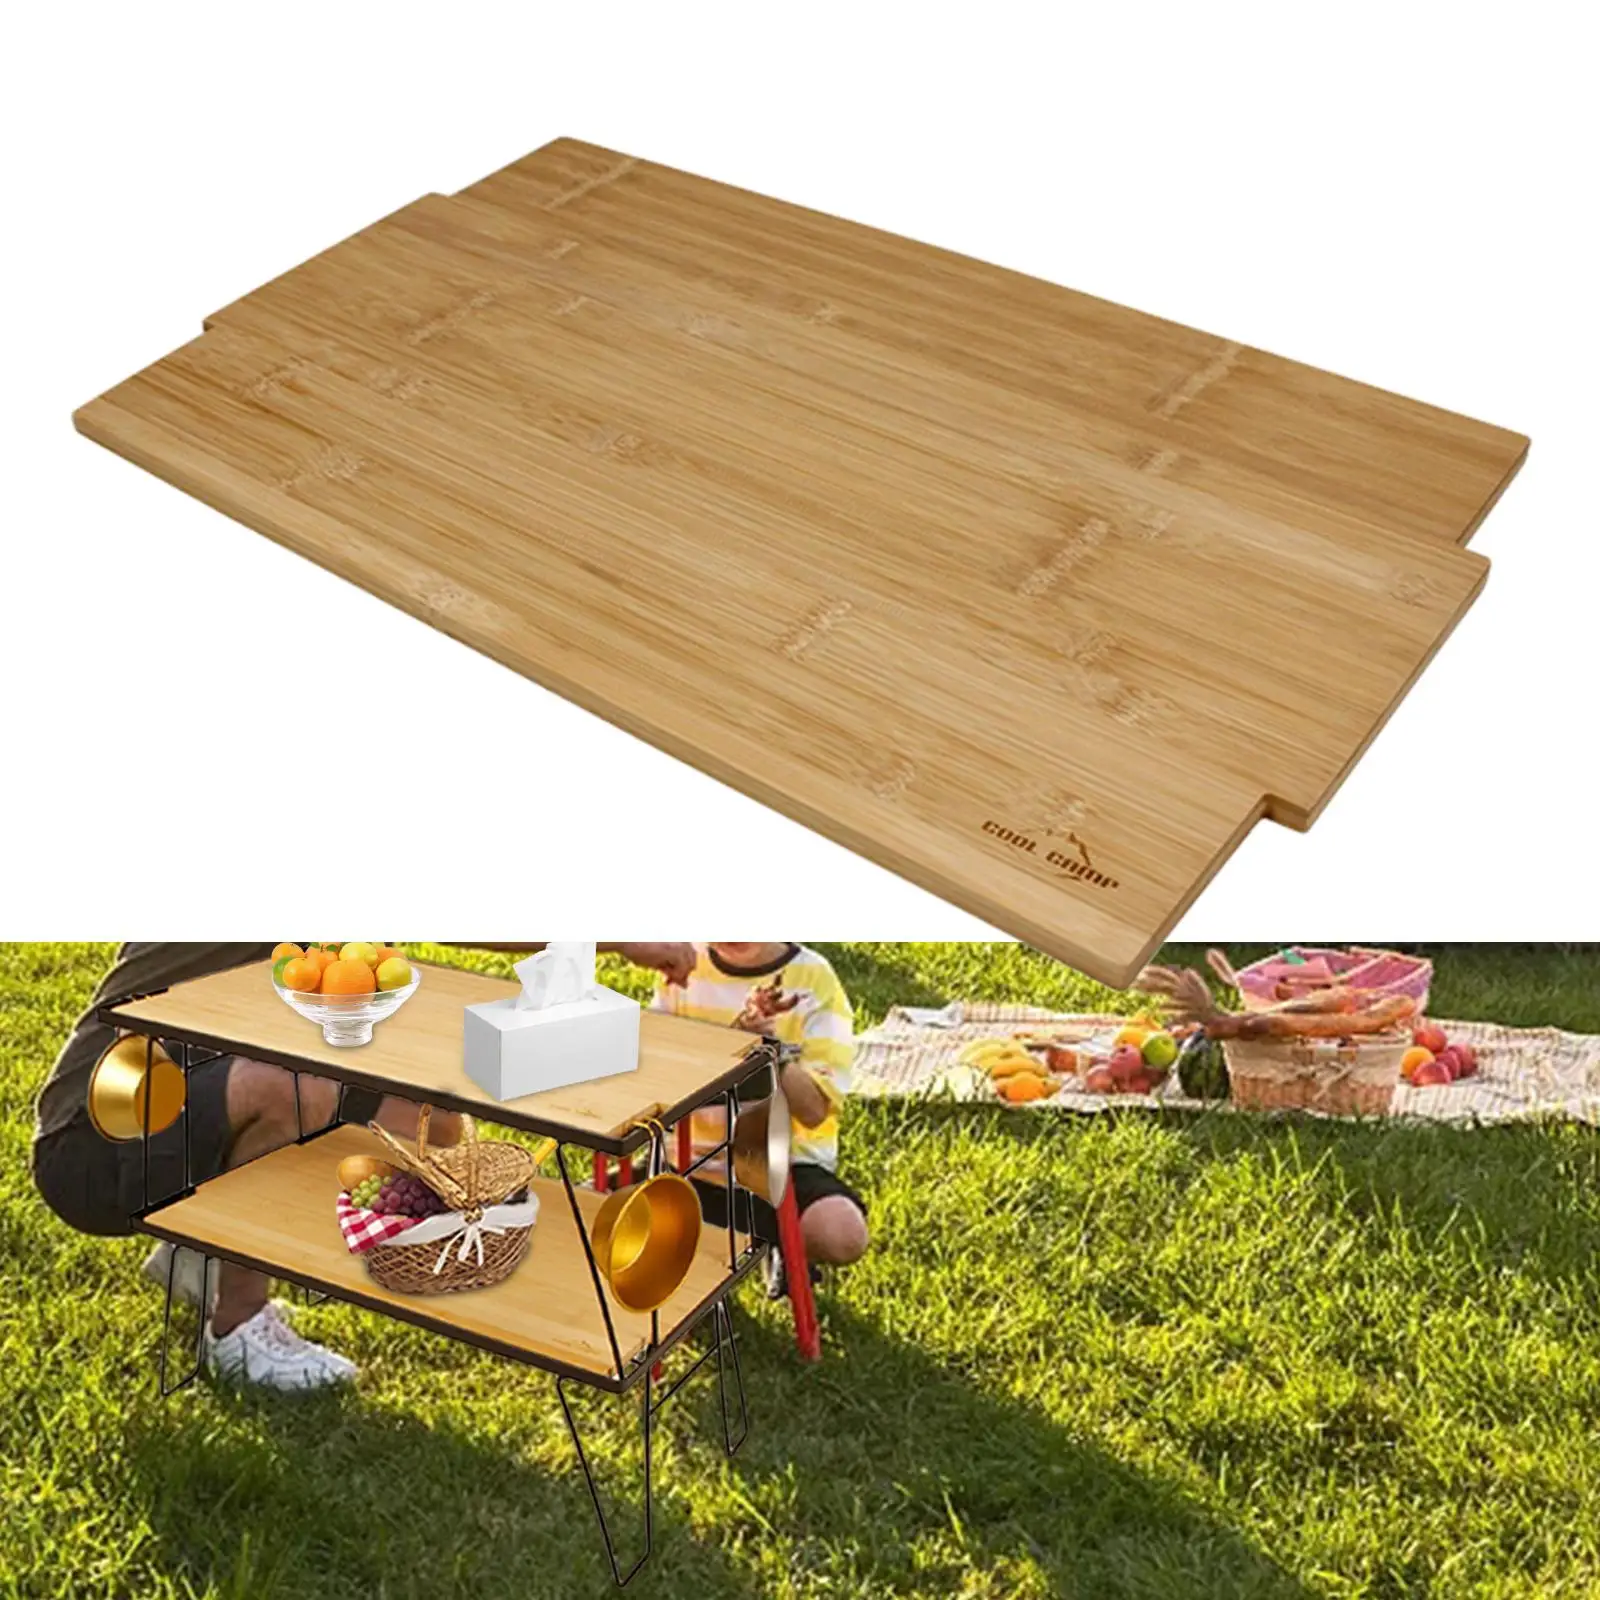 Portable Foldable Table Bamboo Wood Board Camping Board, Barbecue for Backyard Picnic